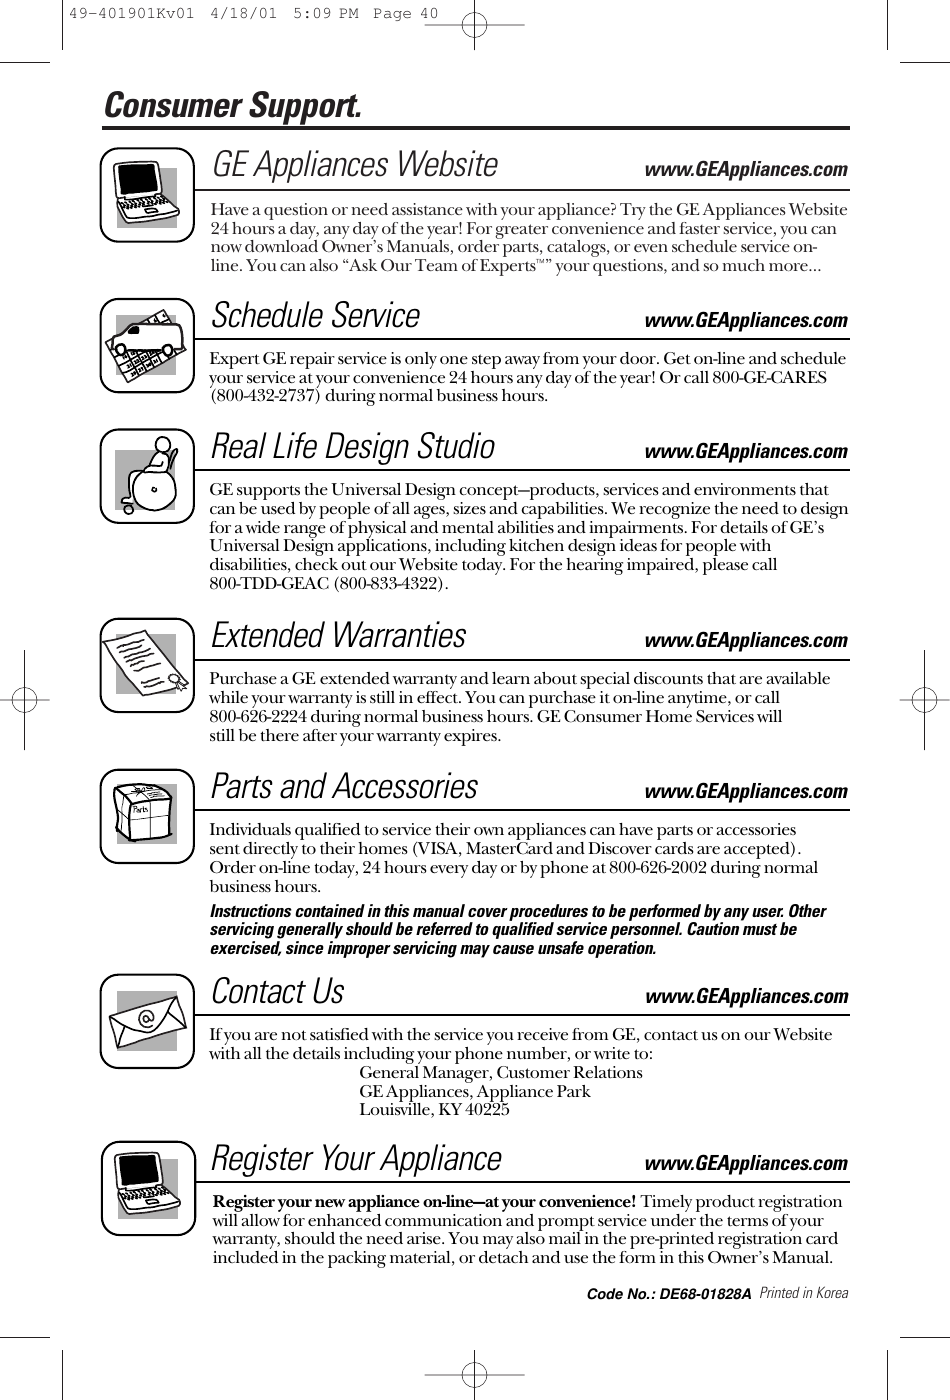 Printed in KoreaConsumer Support. GE Appliances Websitewww.GEAppliances.comHave a question or need assistance with your appliance? Try the GE Appliances Website24 hours a day, any day of the year! For greater convenience and faster service, you cannow download Owner’s Manuals, order parts, catalogs, or even schedule service on-line. You can also “Ask Our Team of Experts™” your questions, and so much more...Schedule Servicewww.GEAppliances.comExpert GE repair service is only one step away from your door. Get on-line and scheduleyour service at your convenience 24 hours any day of the year! Or call 800-GE-CARES(800-432-2737) during normal business hours.Real Life Design Studiowww.GEAppliances.comGE supports the Universal Design concept—products, services and environments thatcan be used by people of all ages, sizes and capabilities. We recognize the need to designfor a wide range of physical and mental abilities and impairments. For details of GE’sUniversal Design applications, including kitchen design ideas for people withdisabilities, check out our Website today. For the hearing impaired, please call 800-TDD-GEAC (800-833-4322). Extended Warrantieswww.GEAppliances.comPurchase a GE extended warranty and learn about special discounts that are availablewhile your warranty is still in effect. You can purchase it on-line anytime, or call 800-626-2224 during normal business hours. GE Consumer Home Services will still be there after your warranty expires.Parts and Accessories www.GEAppliances.comIndividuals qualified to service their own appliances can have parts or accessories sent directly to their homes (VISA, MasterCard and Discover cards are accepted). Order on-line today, 24 hours every day or by phone at 800-626-2002 during normalbusiness hours.Instructions contained in this manual cover procedures to be performed by any user. Otherservicing generally should be referred to qualified service personnel. Caution must beexercised, since improper servicing may cause unsafe operation. Contact Uswww.GEAppliances.comIf you are not satisfied with the service you receive from GE, contact us on our Websitewith all the details including your phone number, or write to: General Manager, Customer RelationsGE Appliances, Appliance ParkLouisville, KY 40225Register Your Appliancewww.GEAppliances.comRegister your new appliance on-line—at your convenience! Timely product registrationwill allow for enhanced communication and prompt service under the terms of yourwarranty, should the need arise. You may also mail in the pre-printed registration cardincluded in the packing material, or detach and use the form in this Owner’s Manual.49-401901Kv01  4/18/01  5:09 PM  Page 40Code No.: DE68-01828A